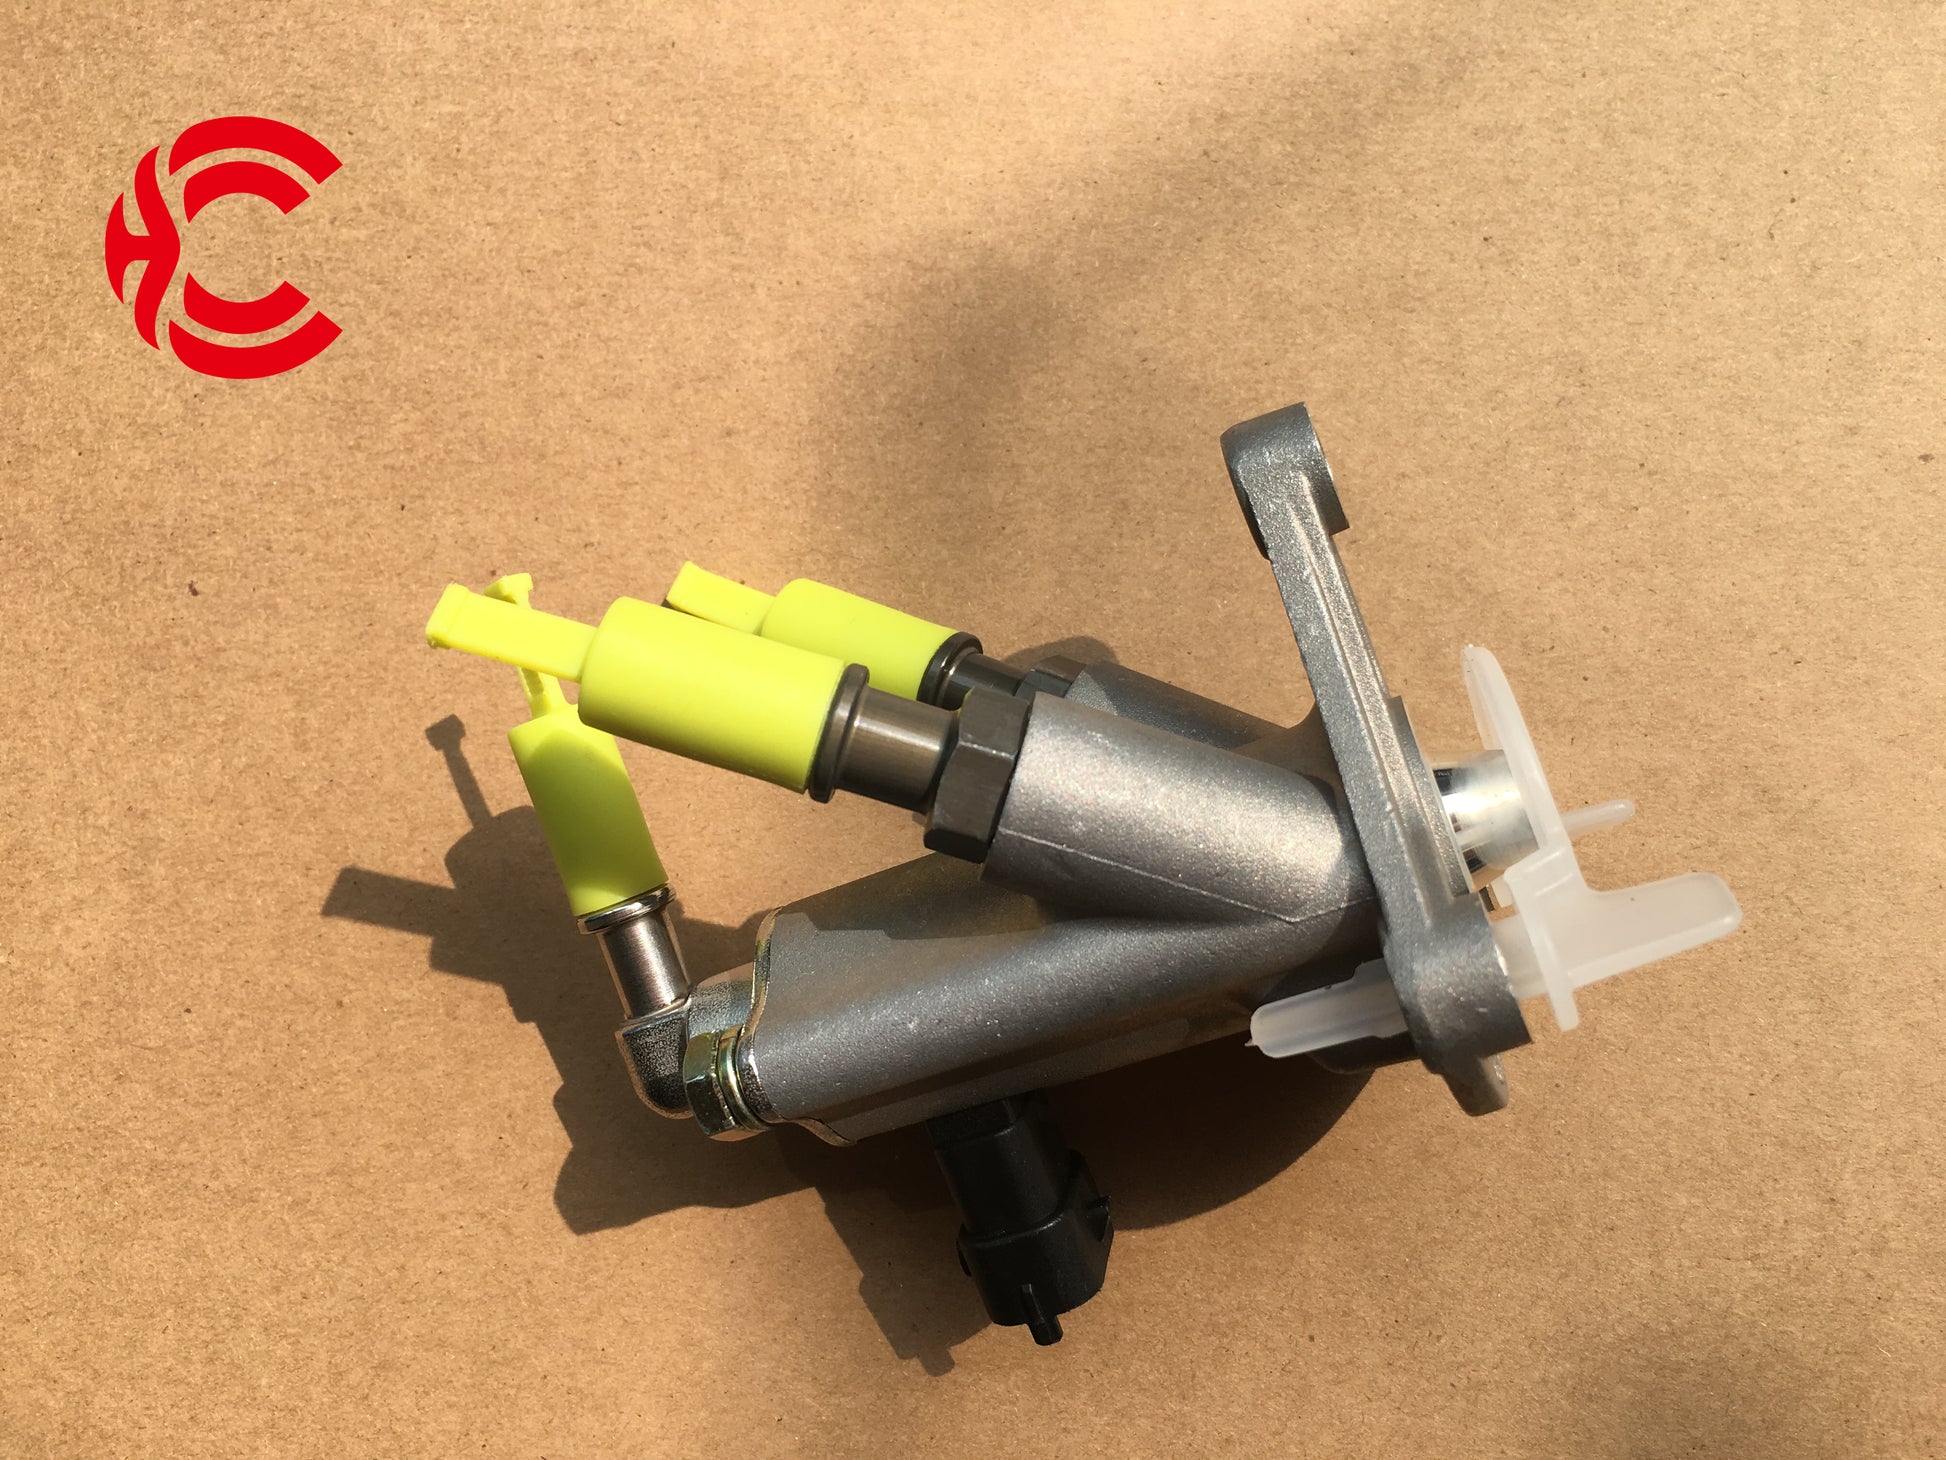 OEM: 1161210-19WMaterial: MetalColor: SilverOrigin: Made in ChinaWeight: 400gPacking List: 1* Adblue/Urea Nozzle More ServiceWe can provide OEM Manufacturing serviceWe can Be your one-step solution for Auto PartsWe can provide technical scheme for you Feel Free to Contact Us, We will get back to you as soon as possible.